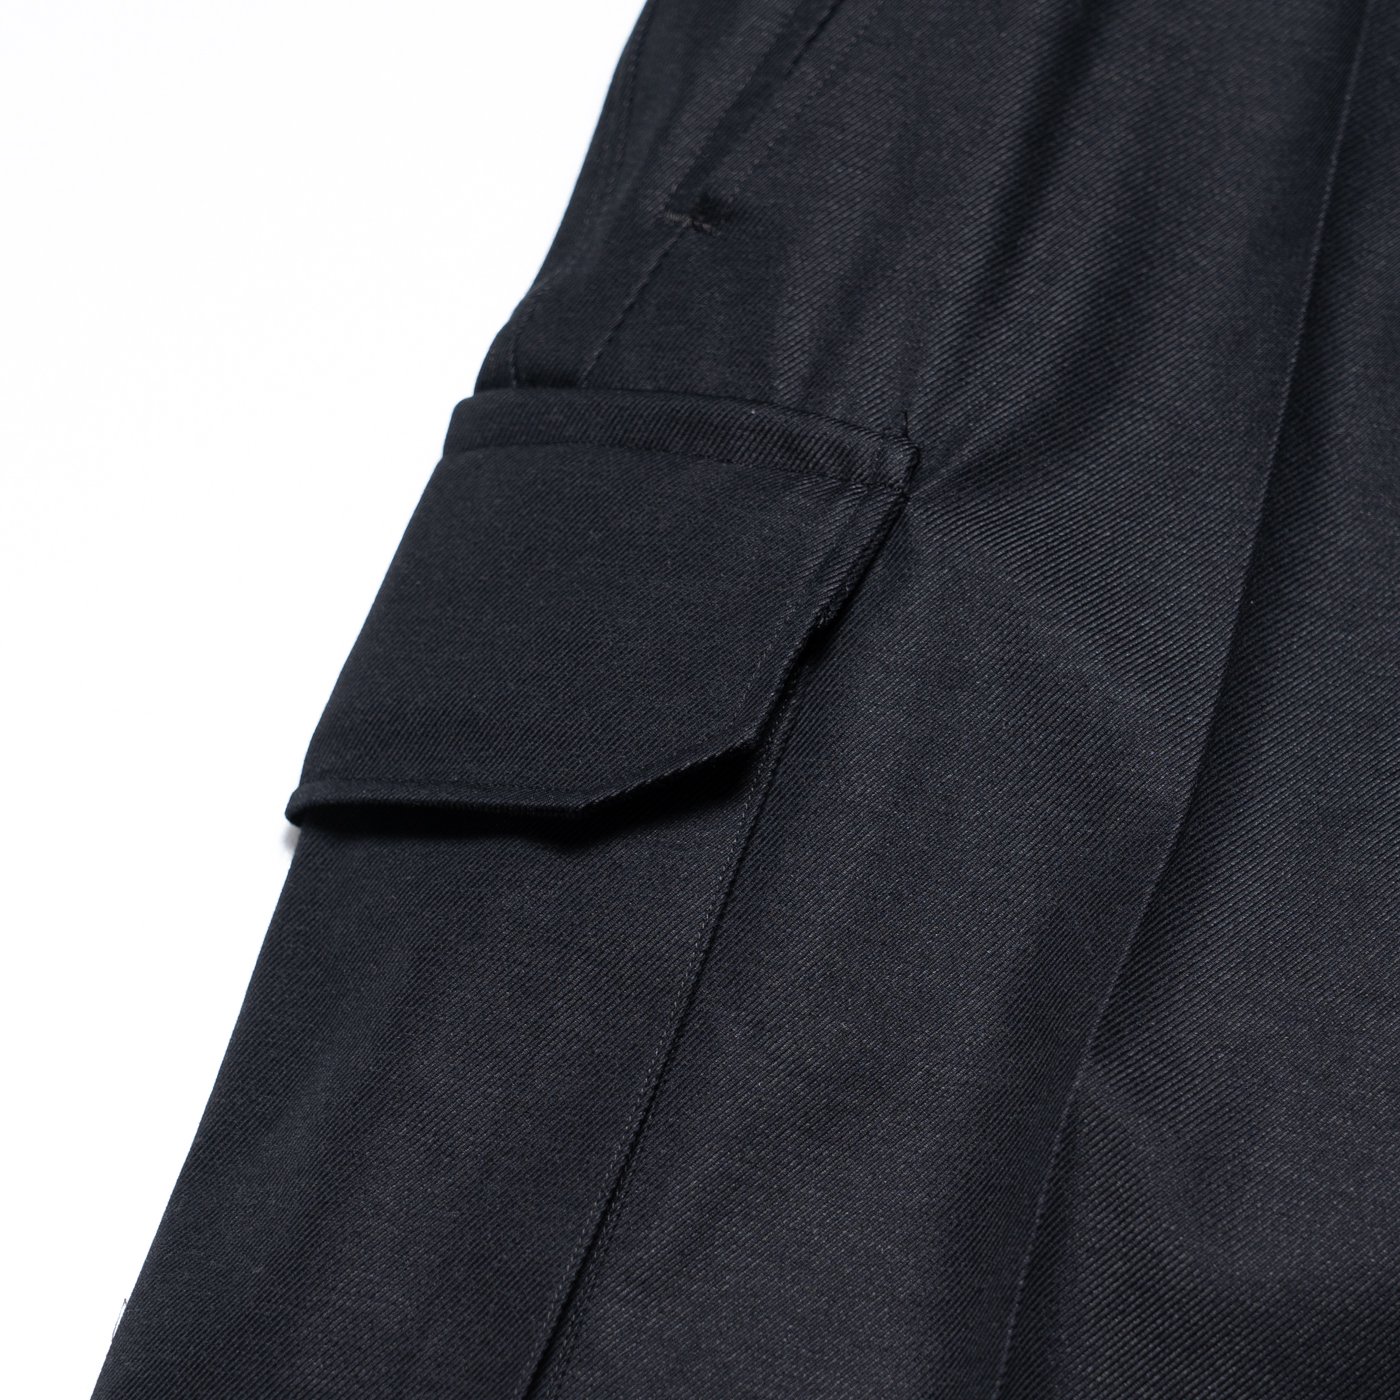 blurhms * Drill Chambray French Combat Trousers * Heather Charcoal